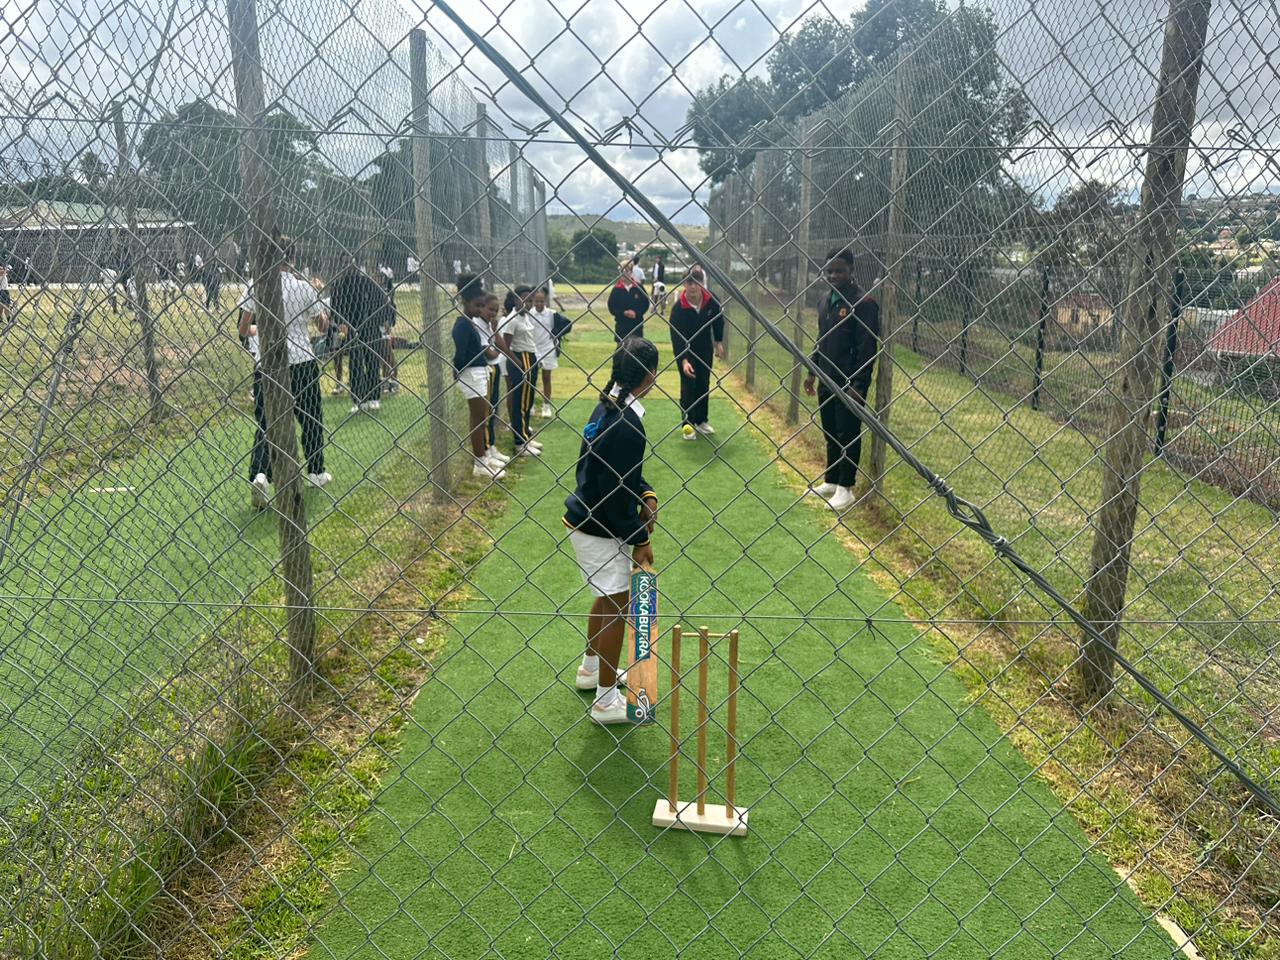 Pupils at the Cricket Clinic for Make a Difference Day. Photo: Jackie Clausen